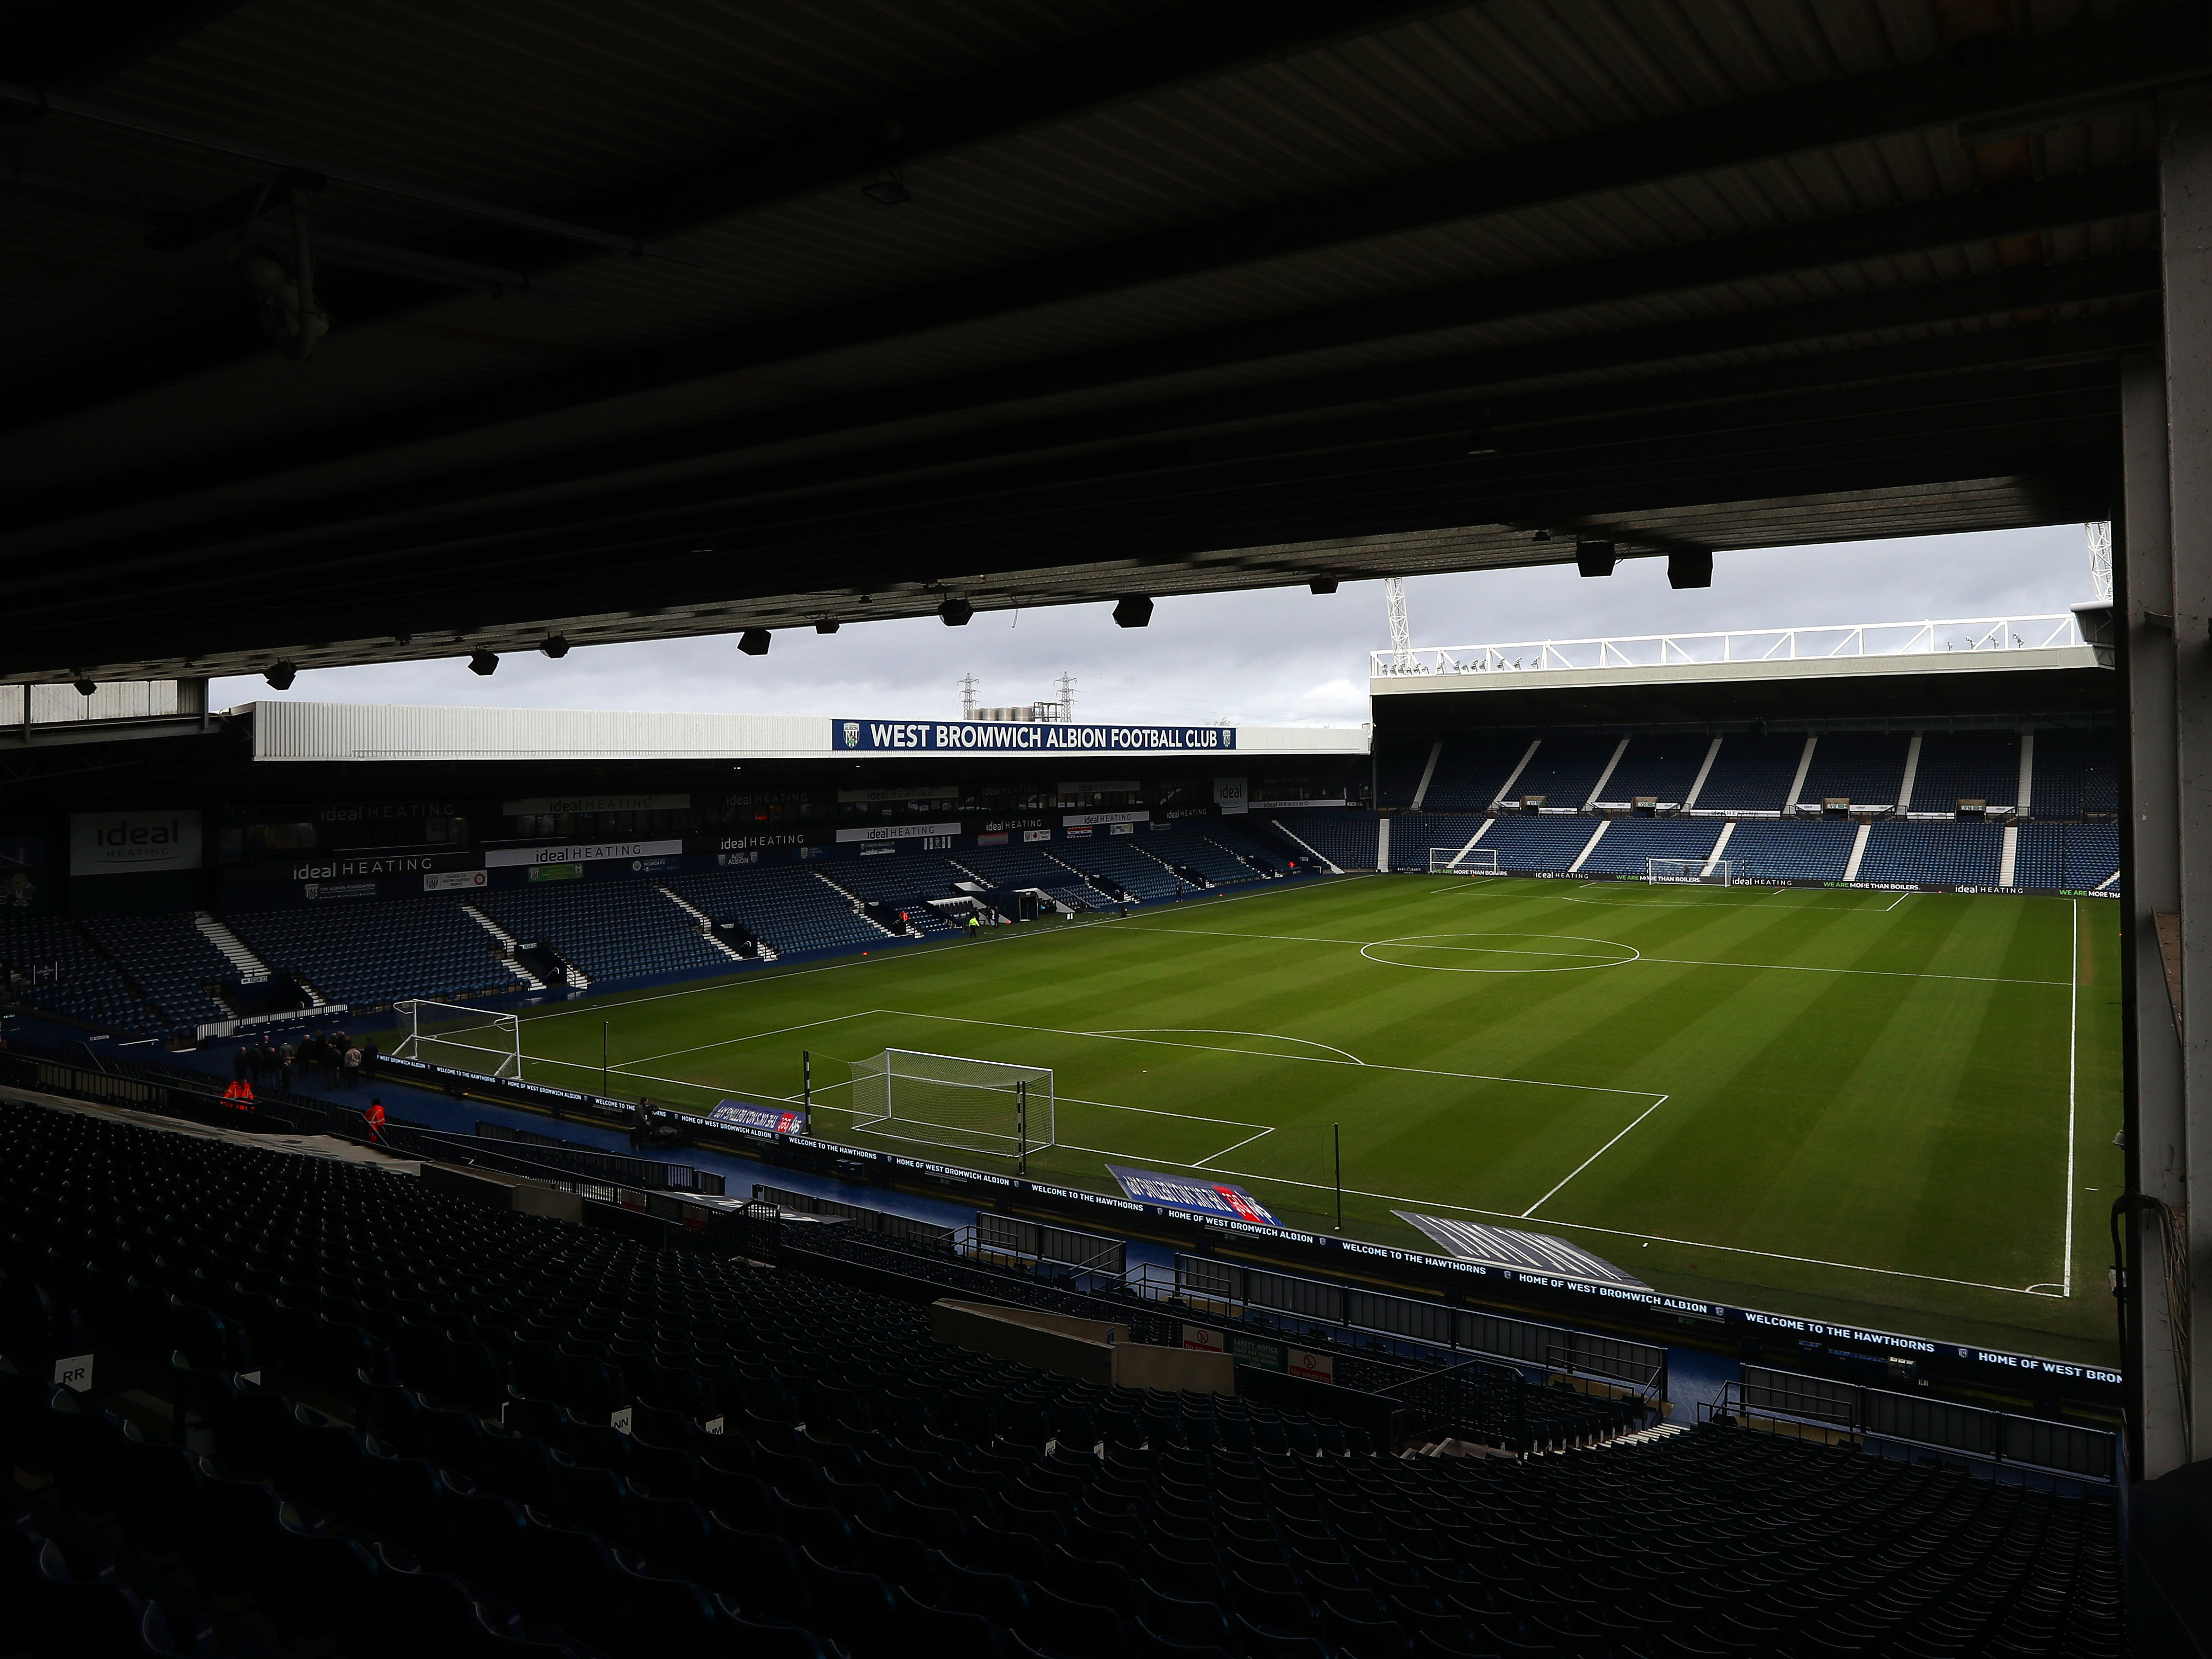 An image of The Hawthorns from the Smethwick